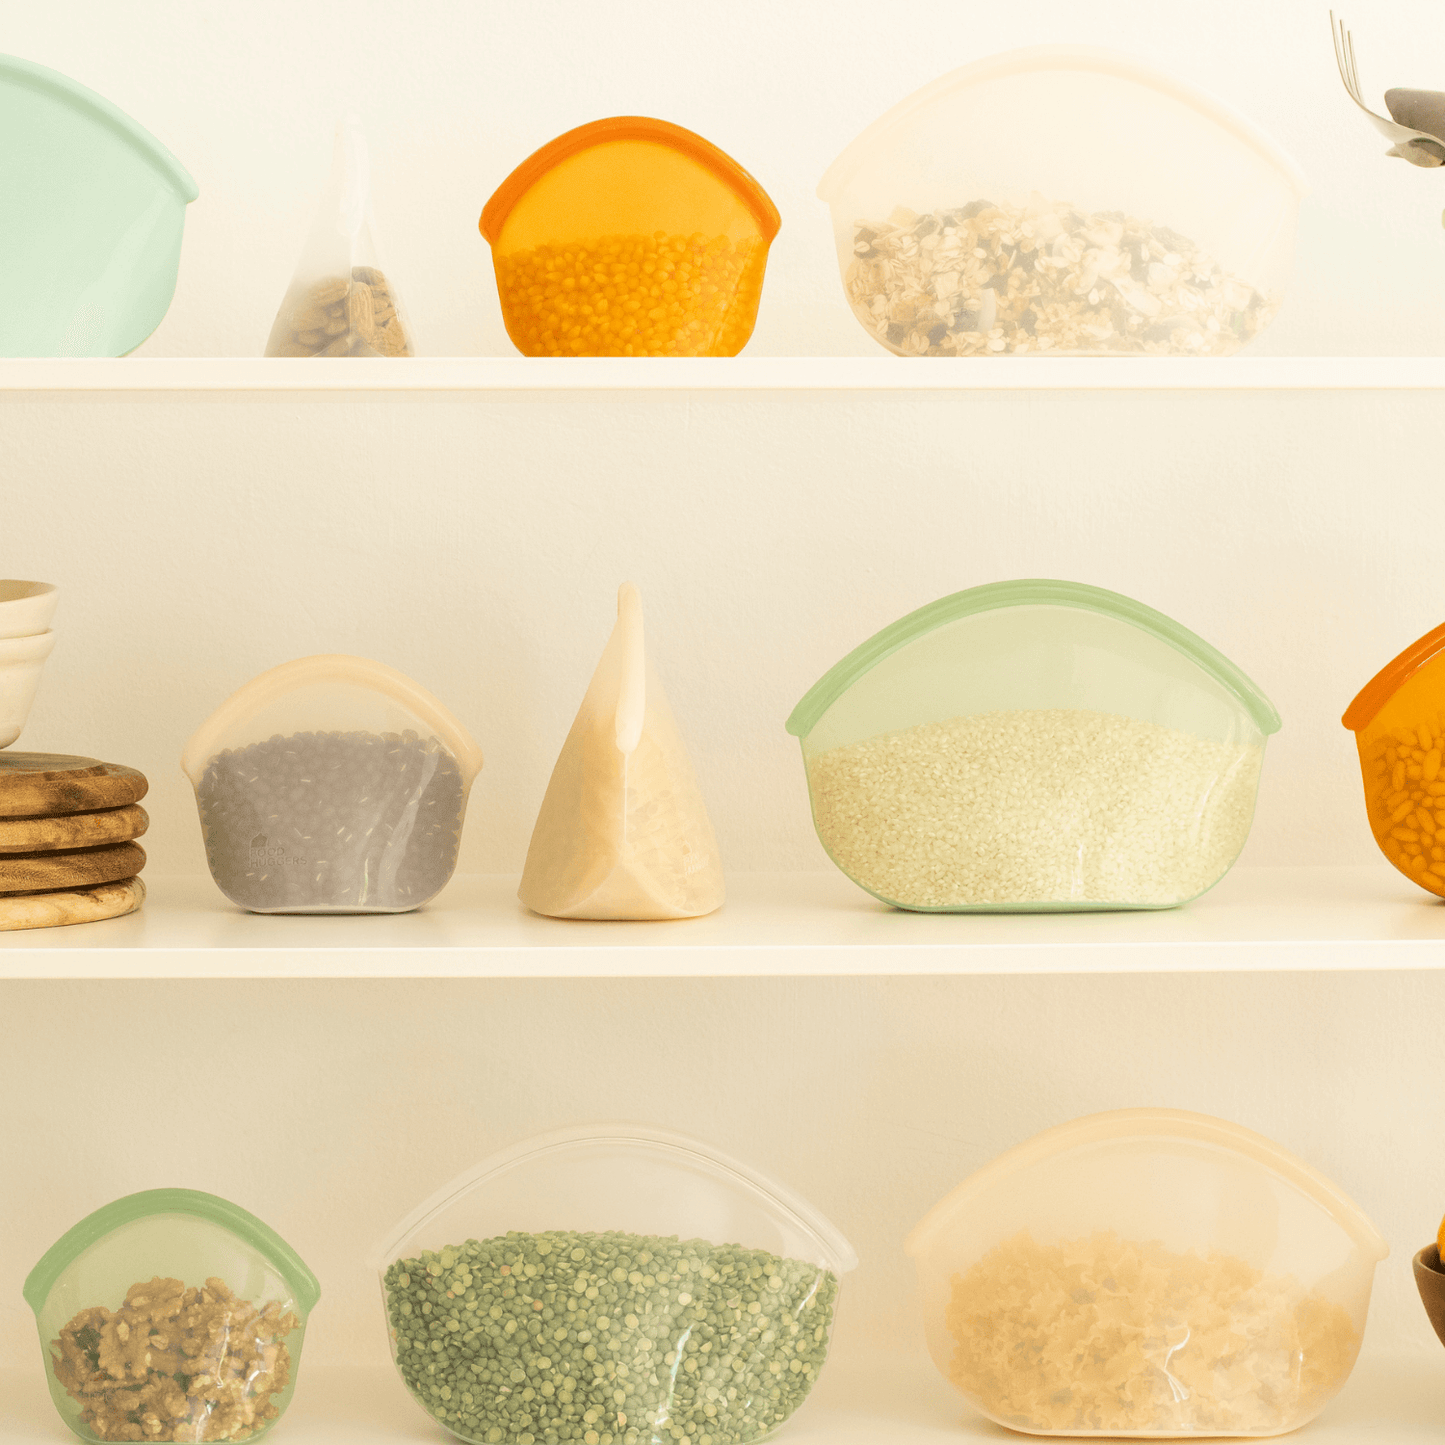 "White three-part shelf with reusable silicone bags as an alternative to plastic waste, filled with beans"